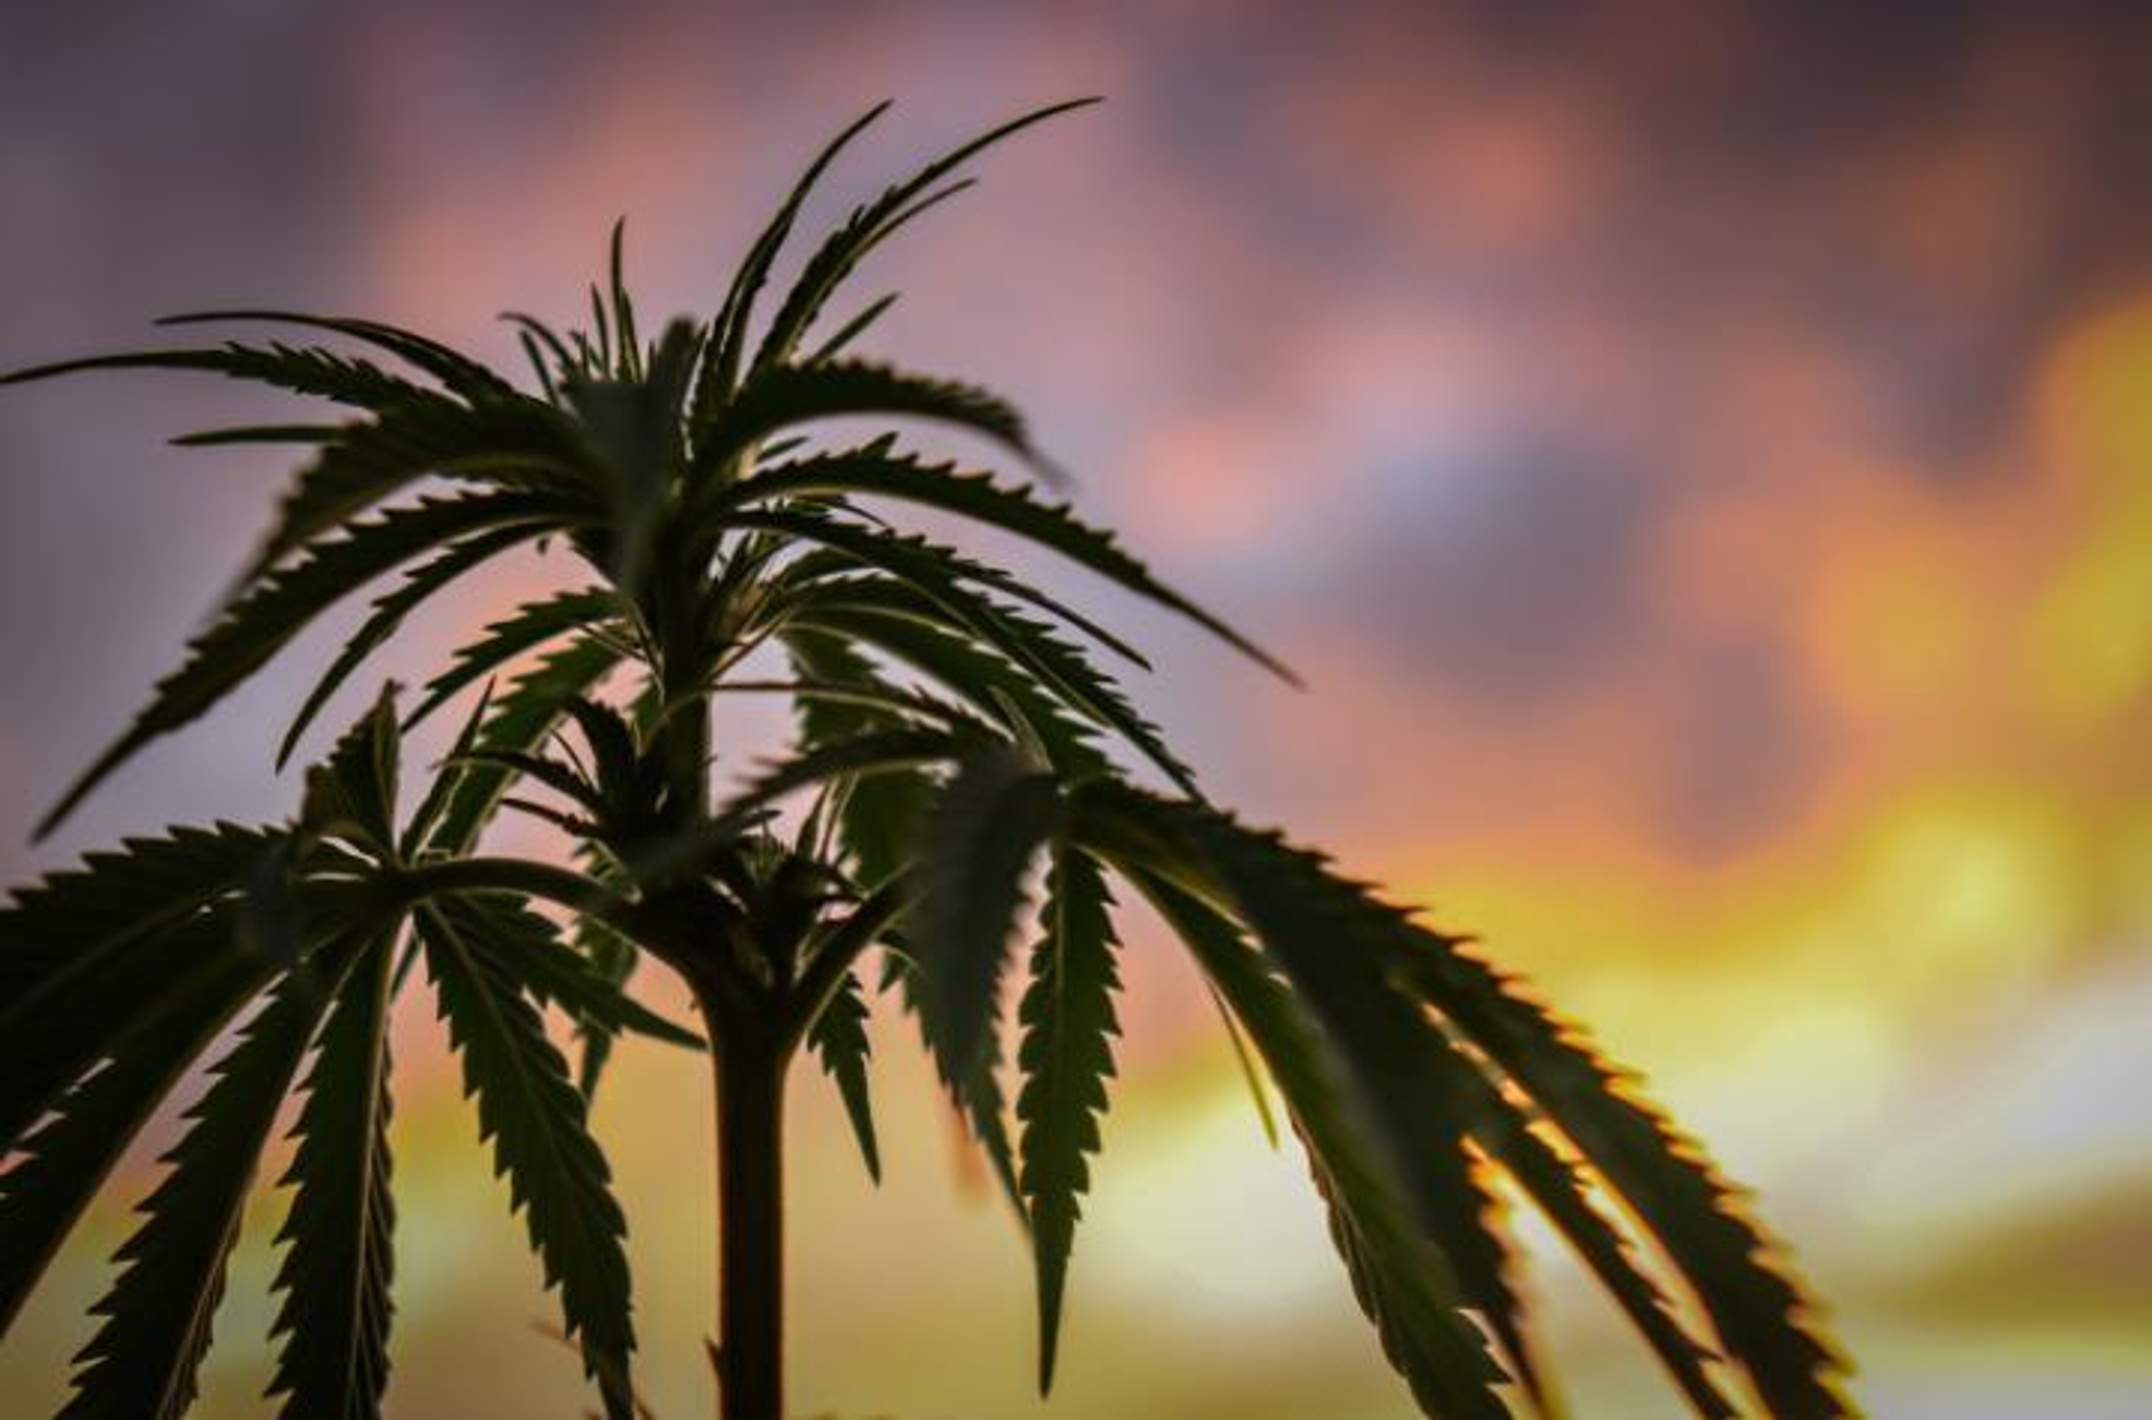 A cannabis plant against backdrop of sunset